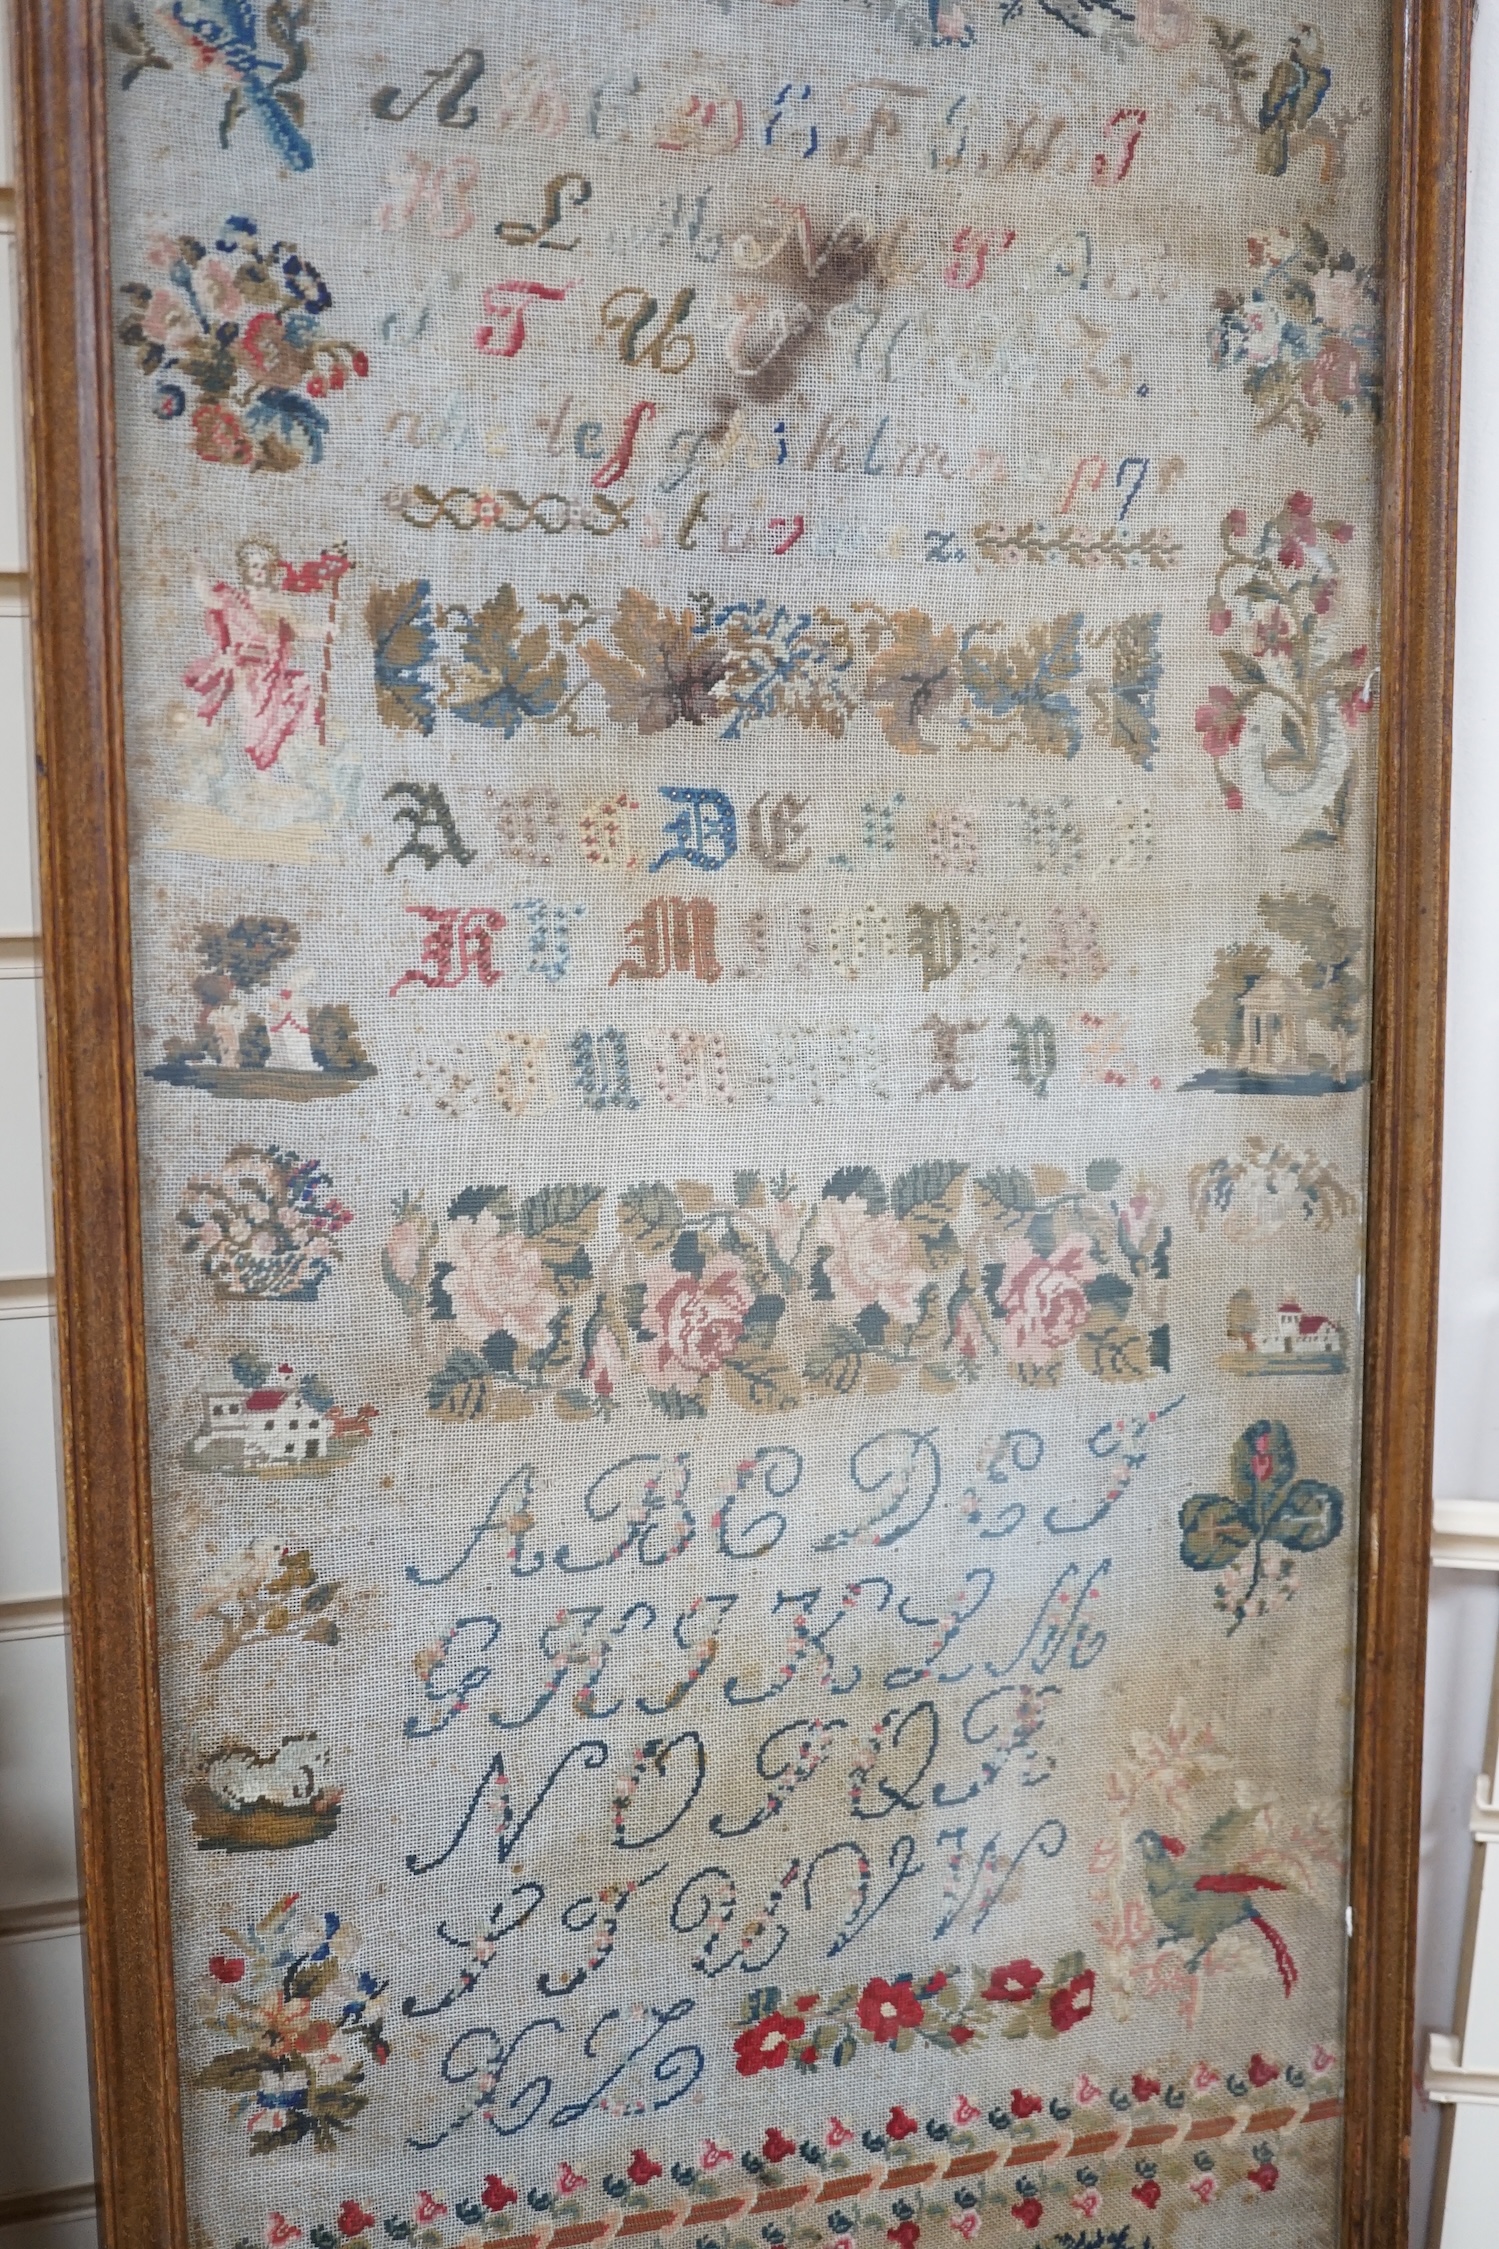 Two mid 19th century embroideries; a framed sampler dated 1809 and an embroidered figurative panel, largest 114 x 42cm. Condition - poor